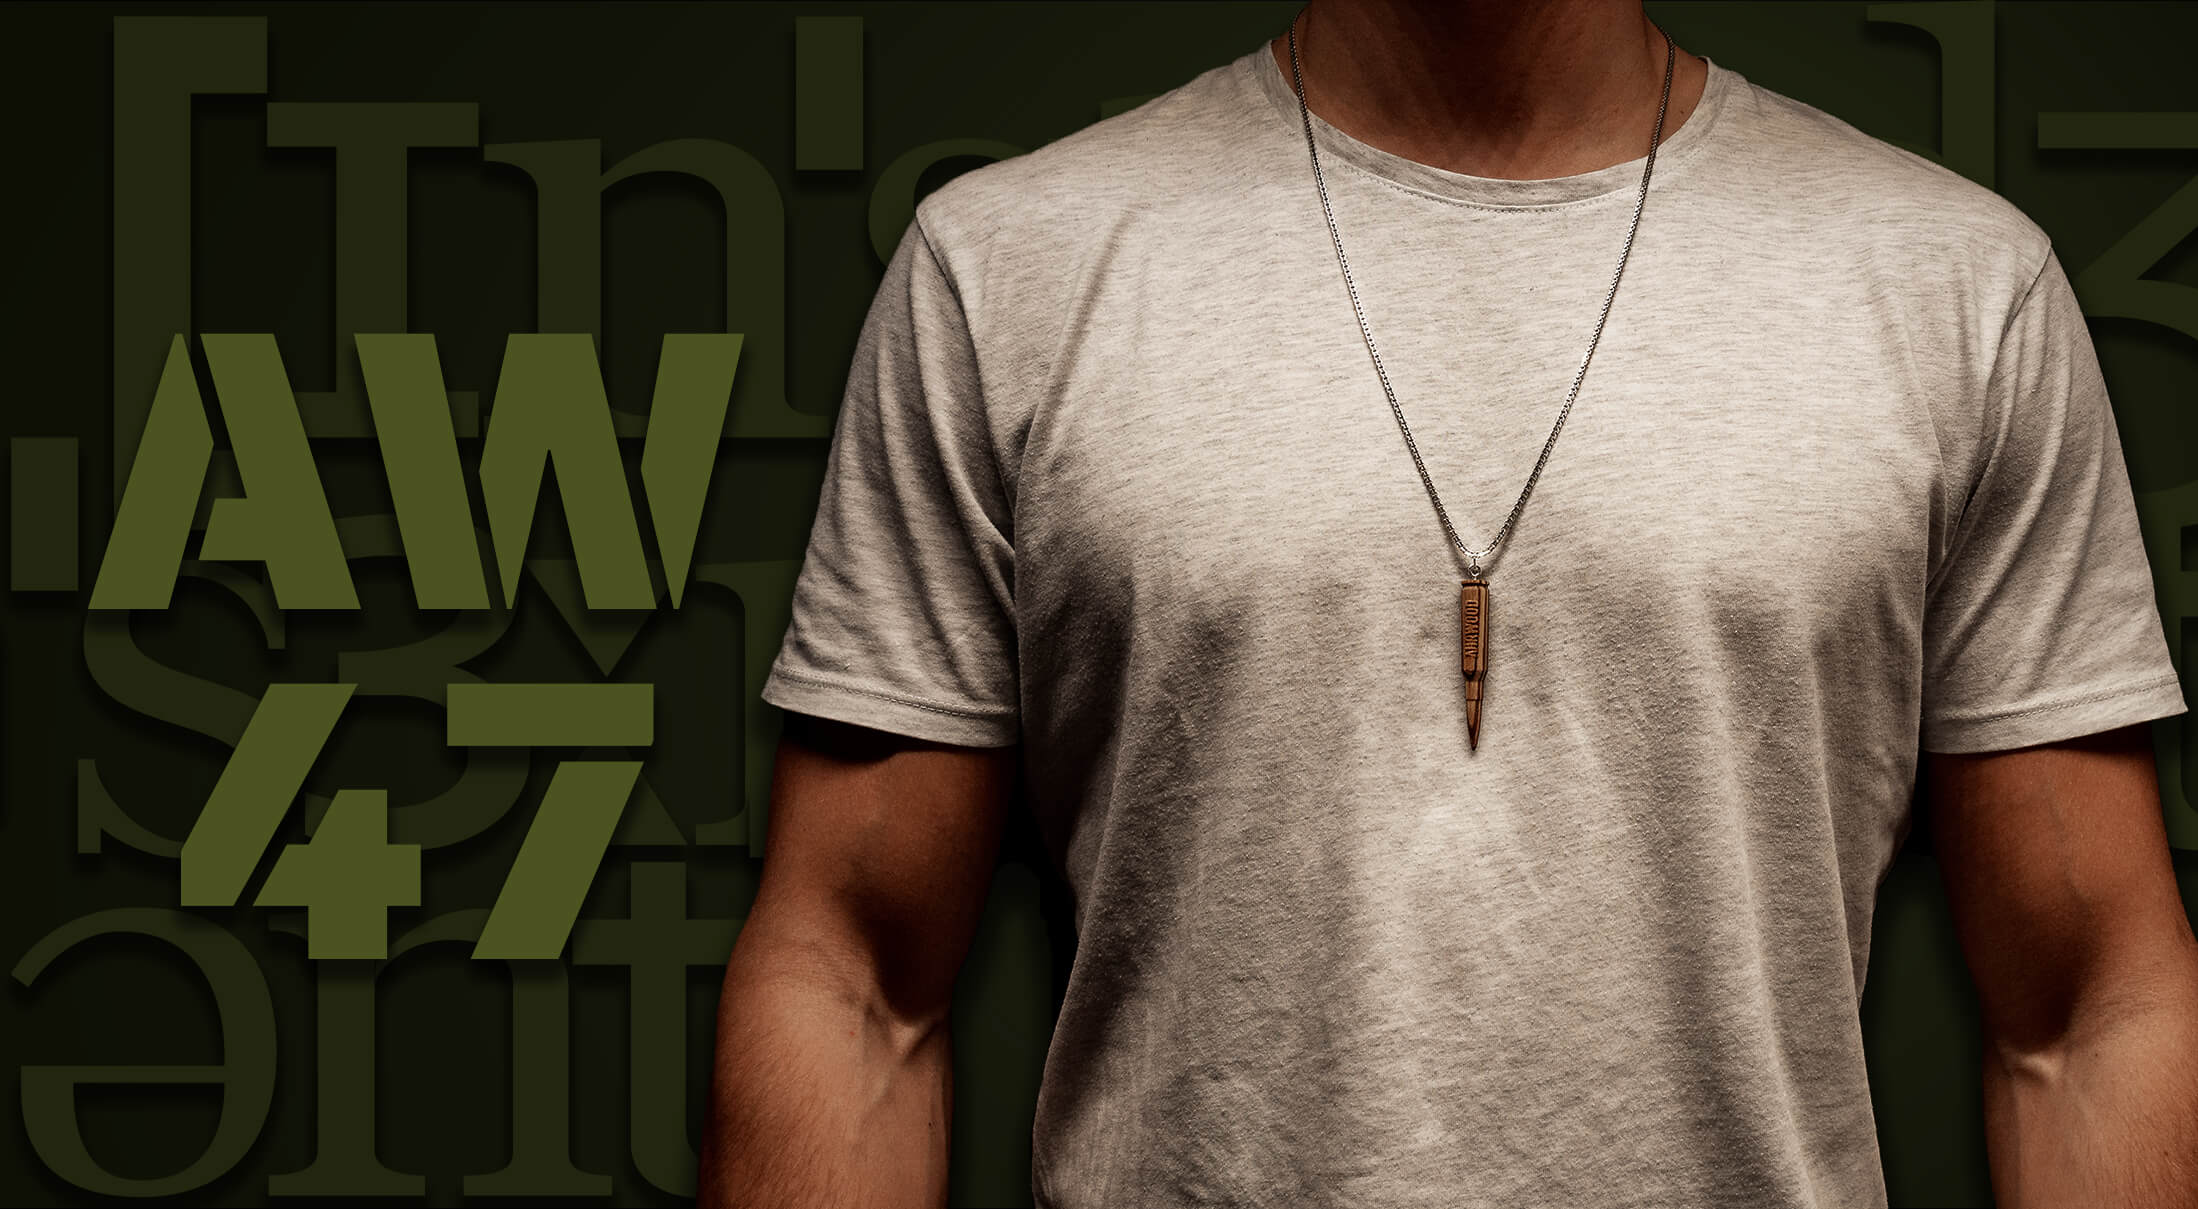 High-quality hardwood necklace "AW47" - by Ahrwood